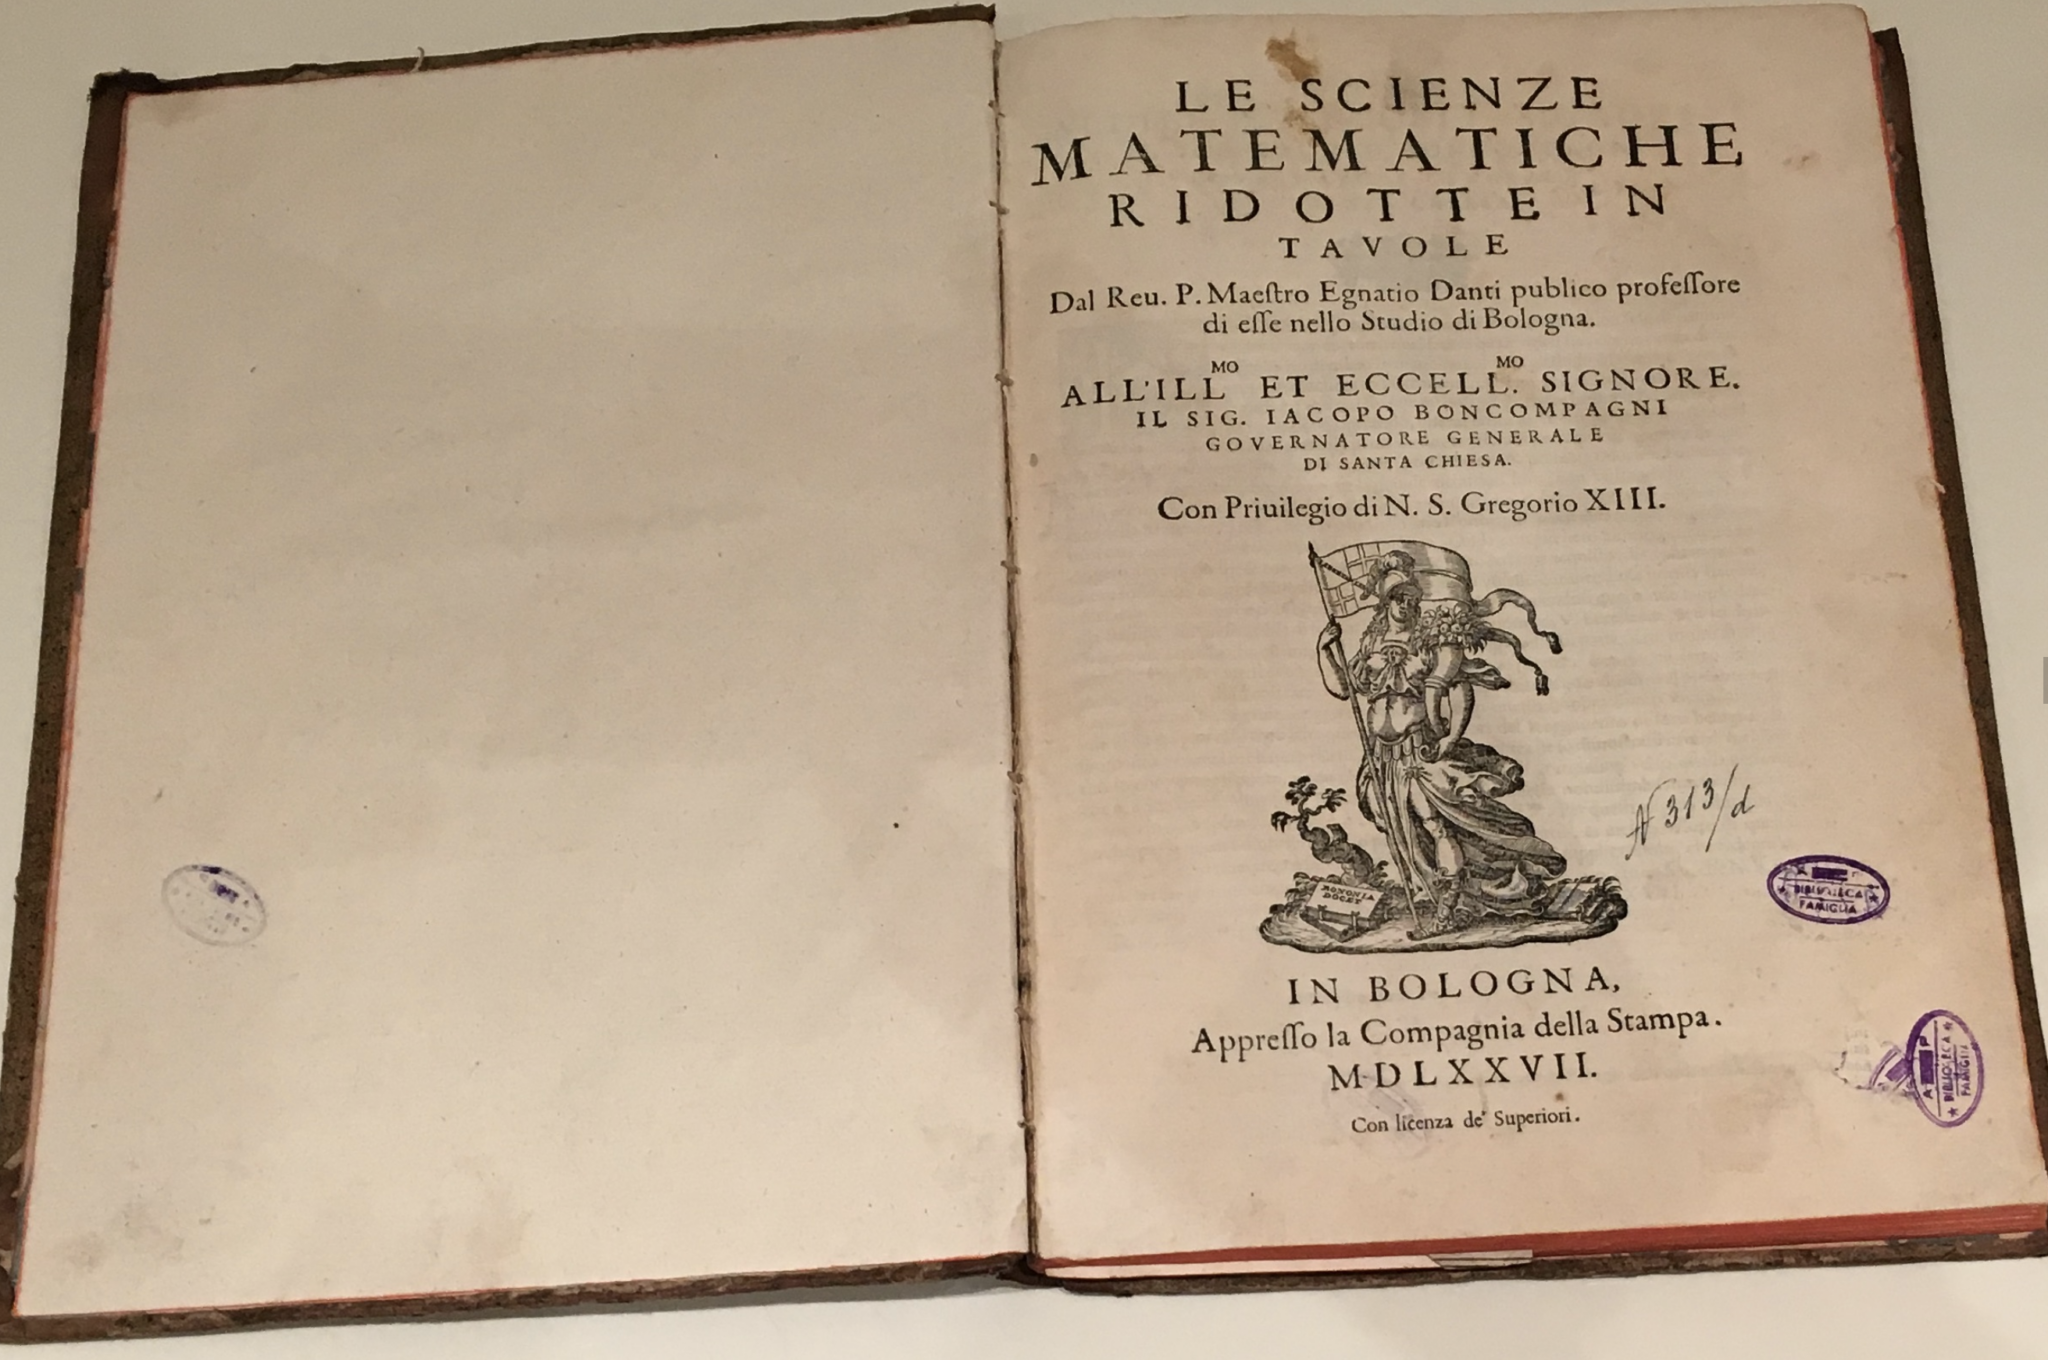 Three rare works, including Egnazio Danti’s schematization of mathematics and a paper instrument for calculating right ascension